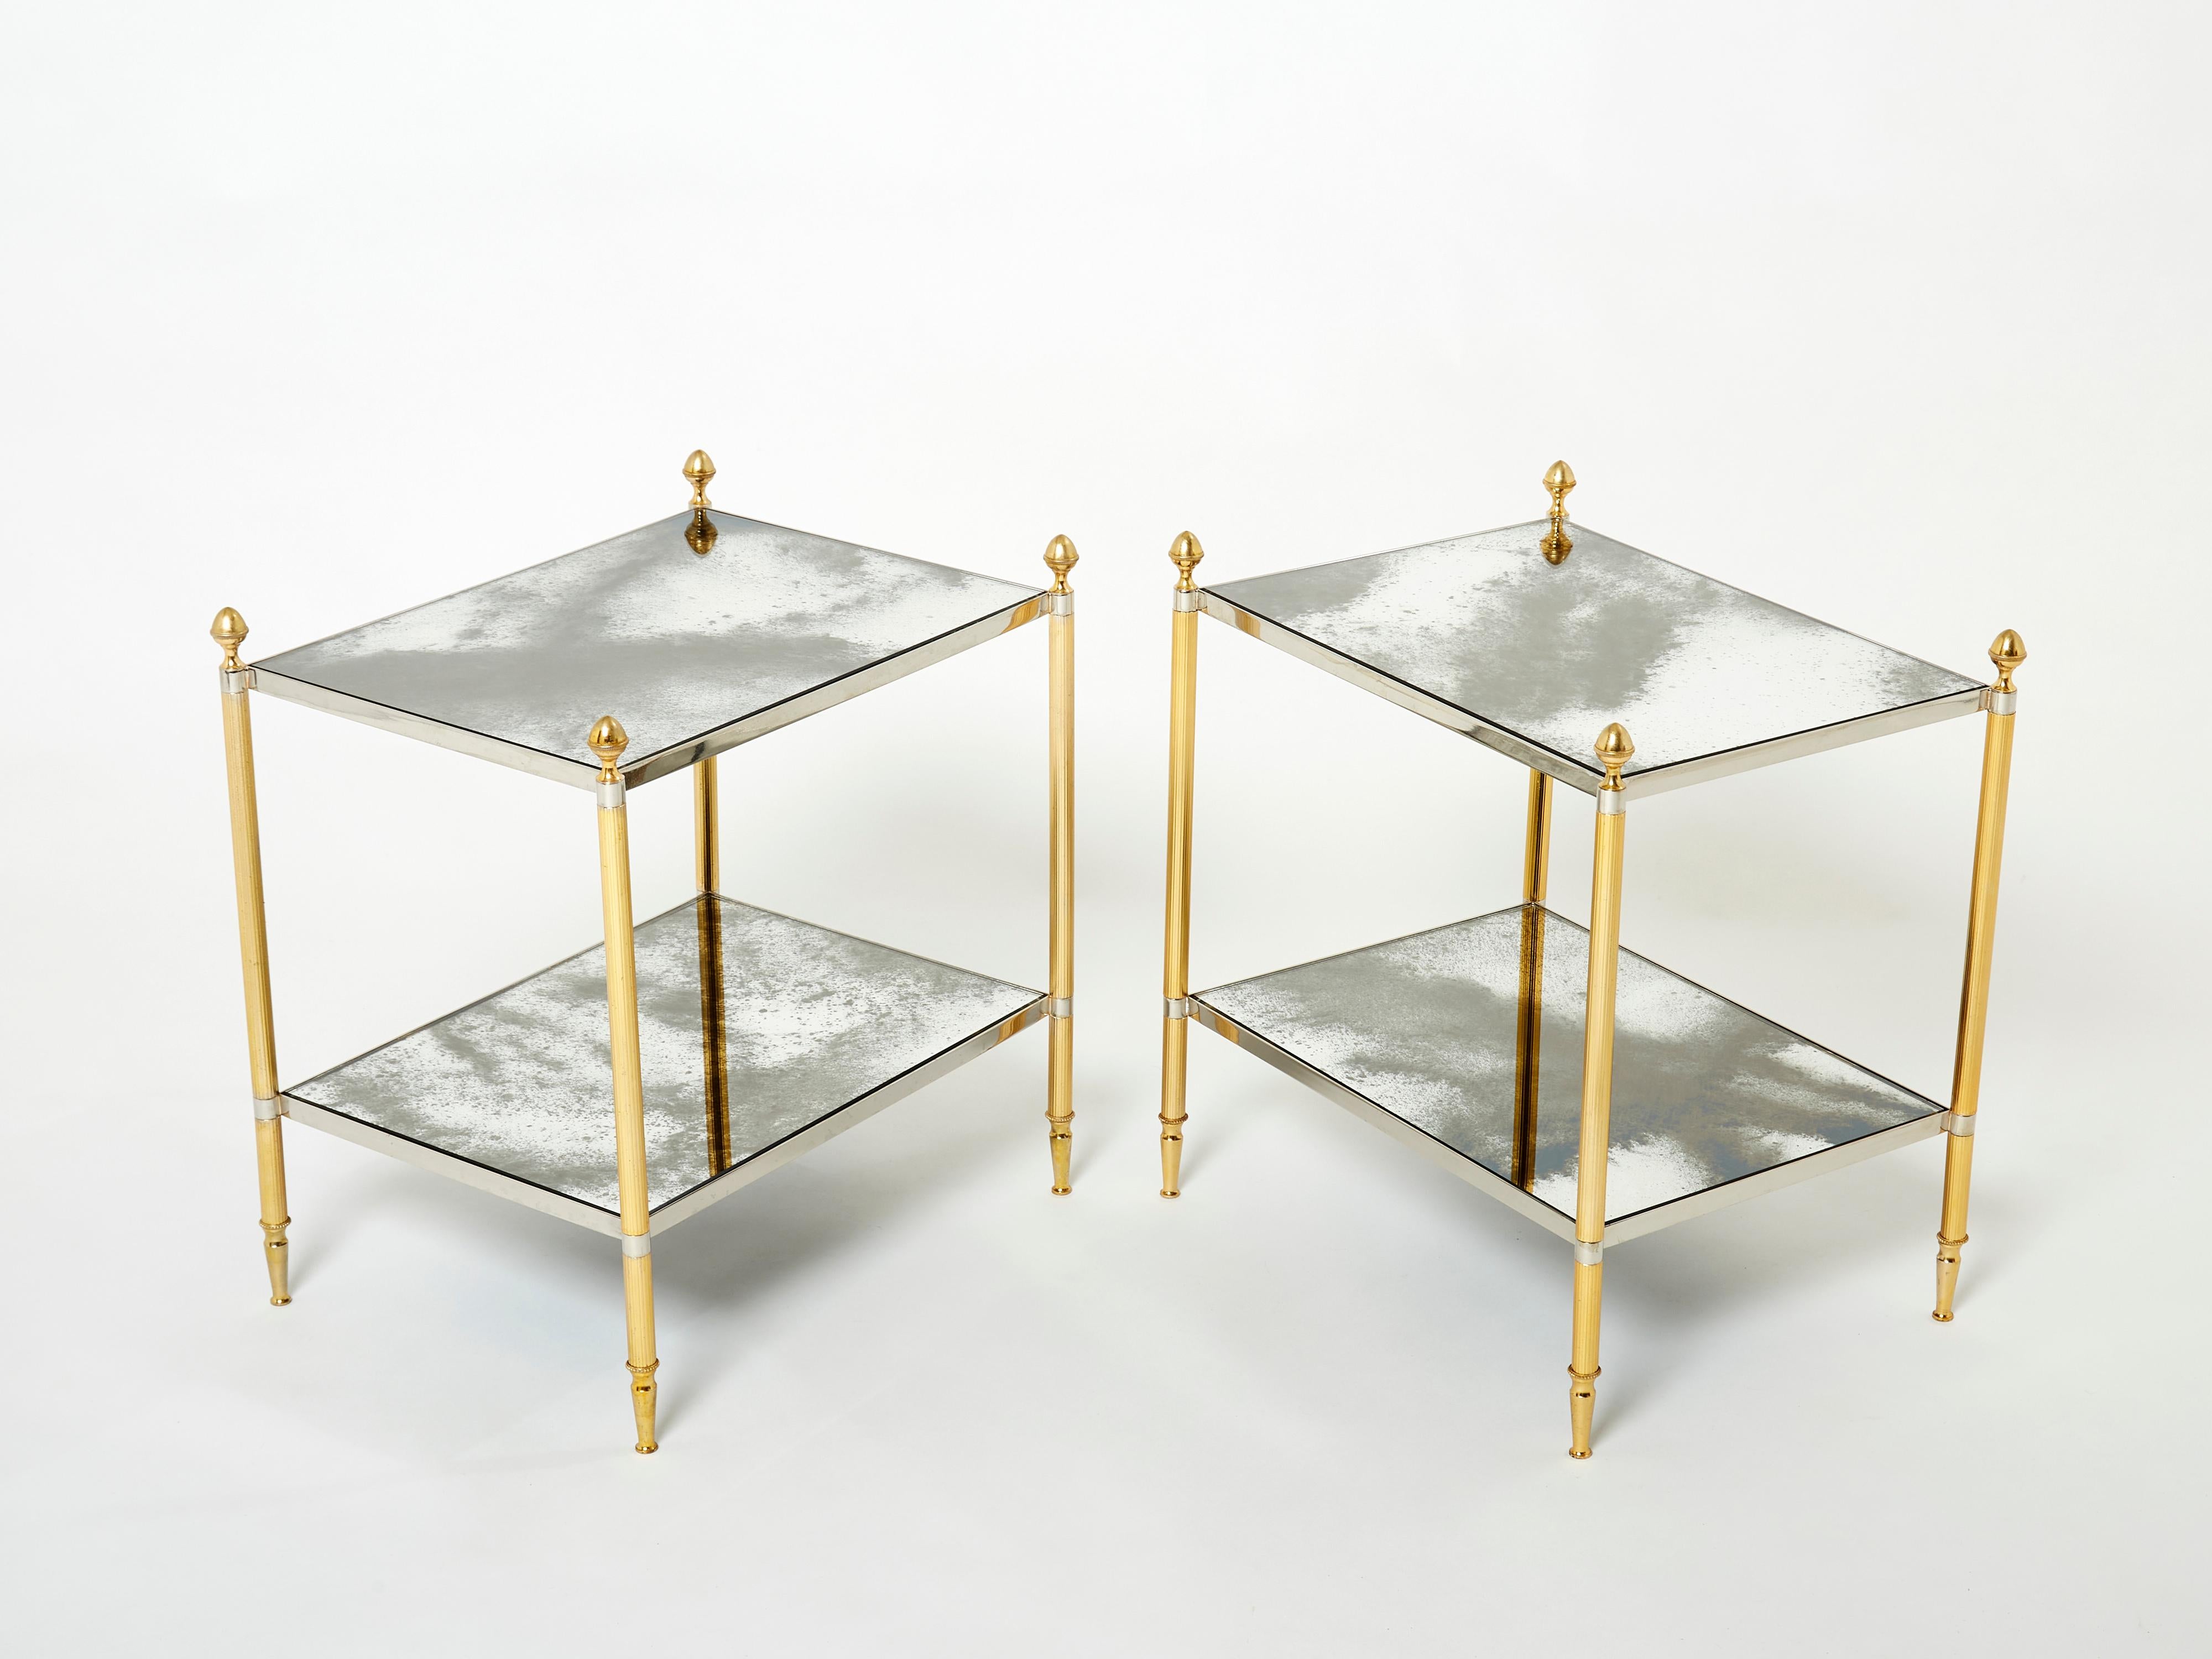 This pair of two-tier end tables by French design house Maison Jansen was created with beautiful brass legs, chrome strappings, typical french neoclassical pine cones, and beautiful old patina mirrors in the 1970s. The two-tier mirrors are timeless